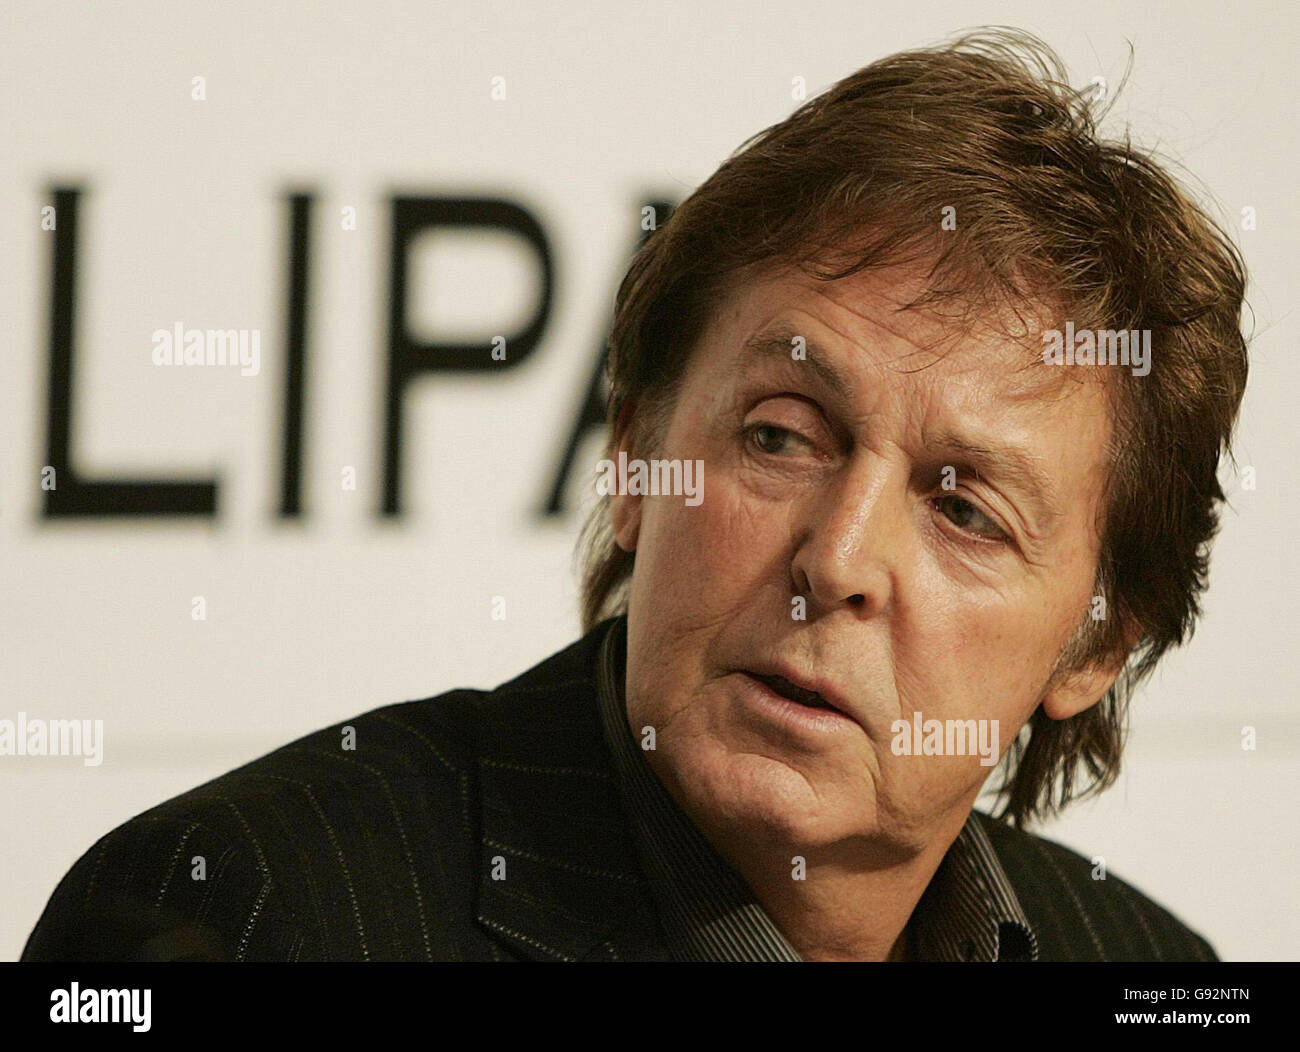 Sir Paul McCartney speaks during a press conference to mark the 10th anniversary of his 'fame academy', Monday January 30, 2006. The former Beatle co-founded the Liverpool Institute for Performing Arts 10 years ago. Around 250 of its students and graduates will take part in a gala performance at Liverpool Philharmonic Hall today. See PA story SHOWBIZ McCartney. PRESS ASSOCIATION photo. Photo credit should read: Martin Rickett/PA. Stock Photo